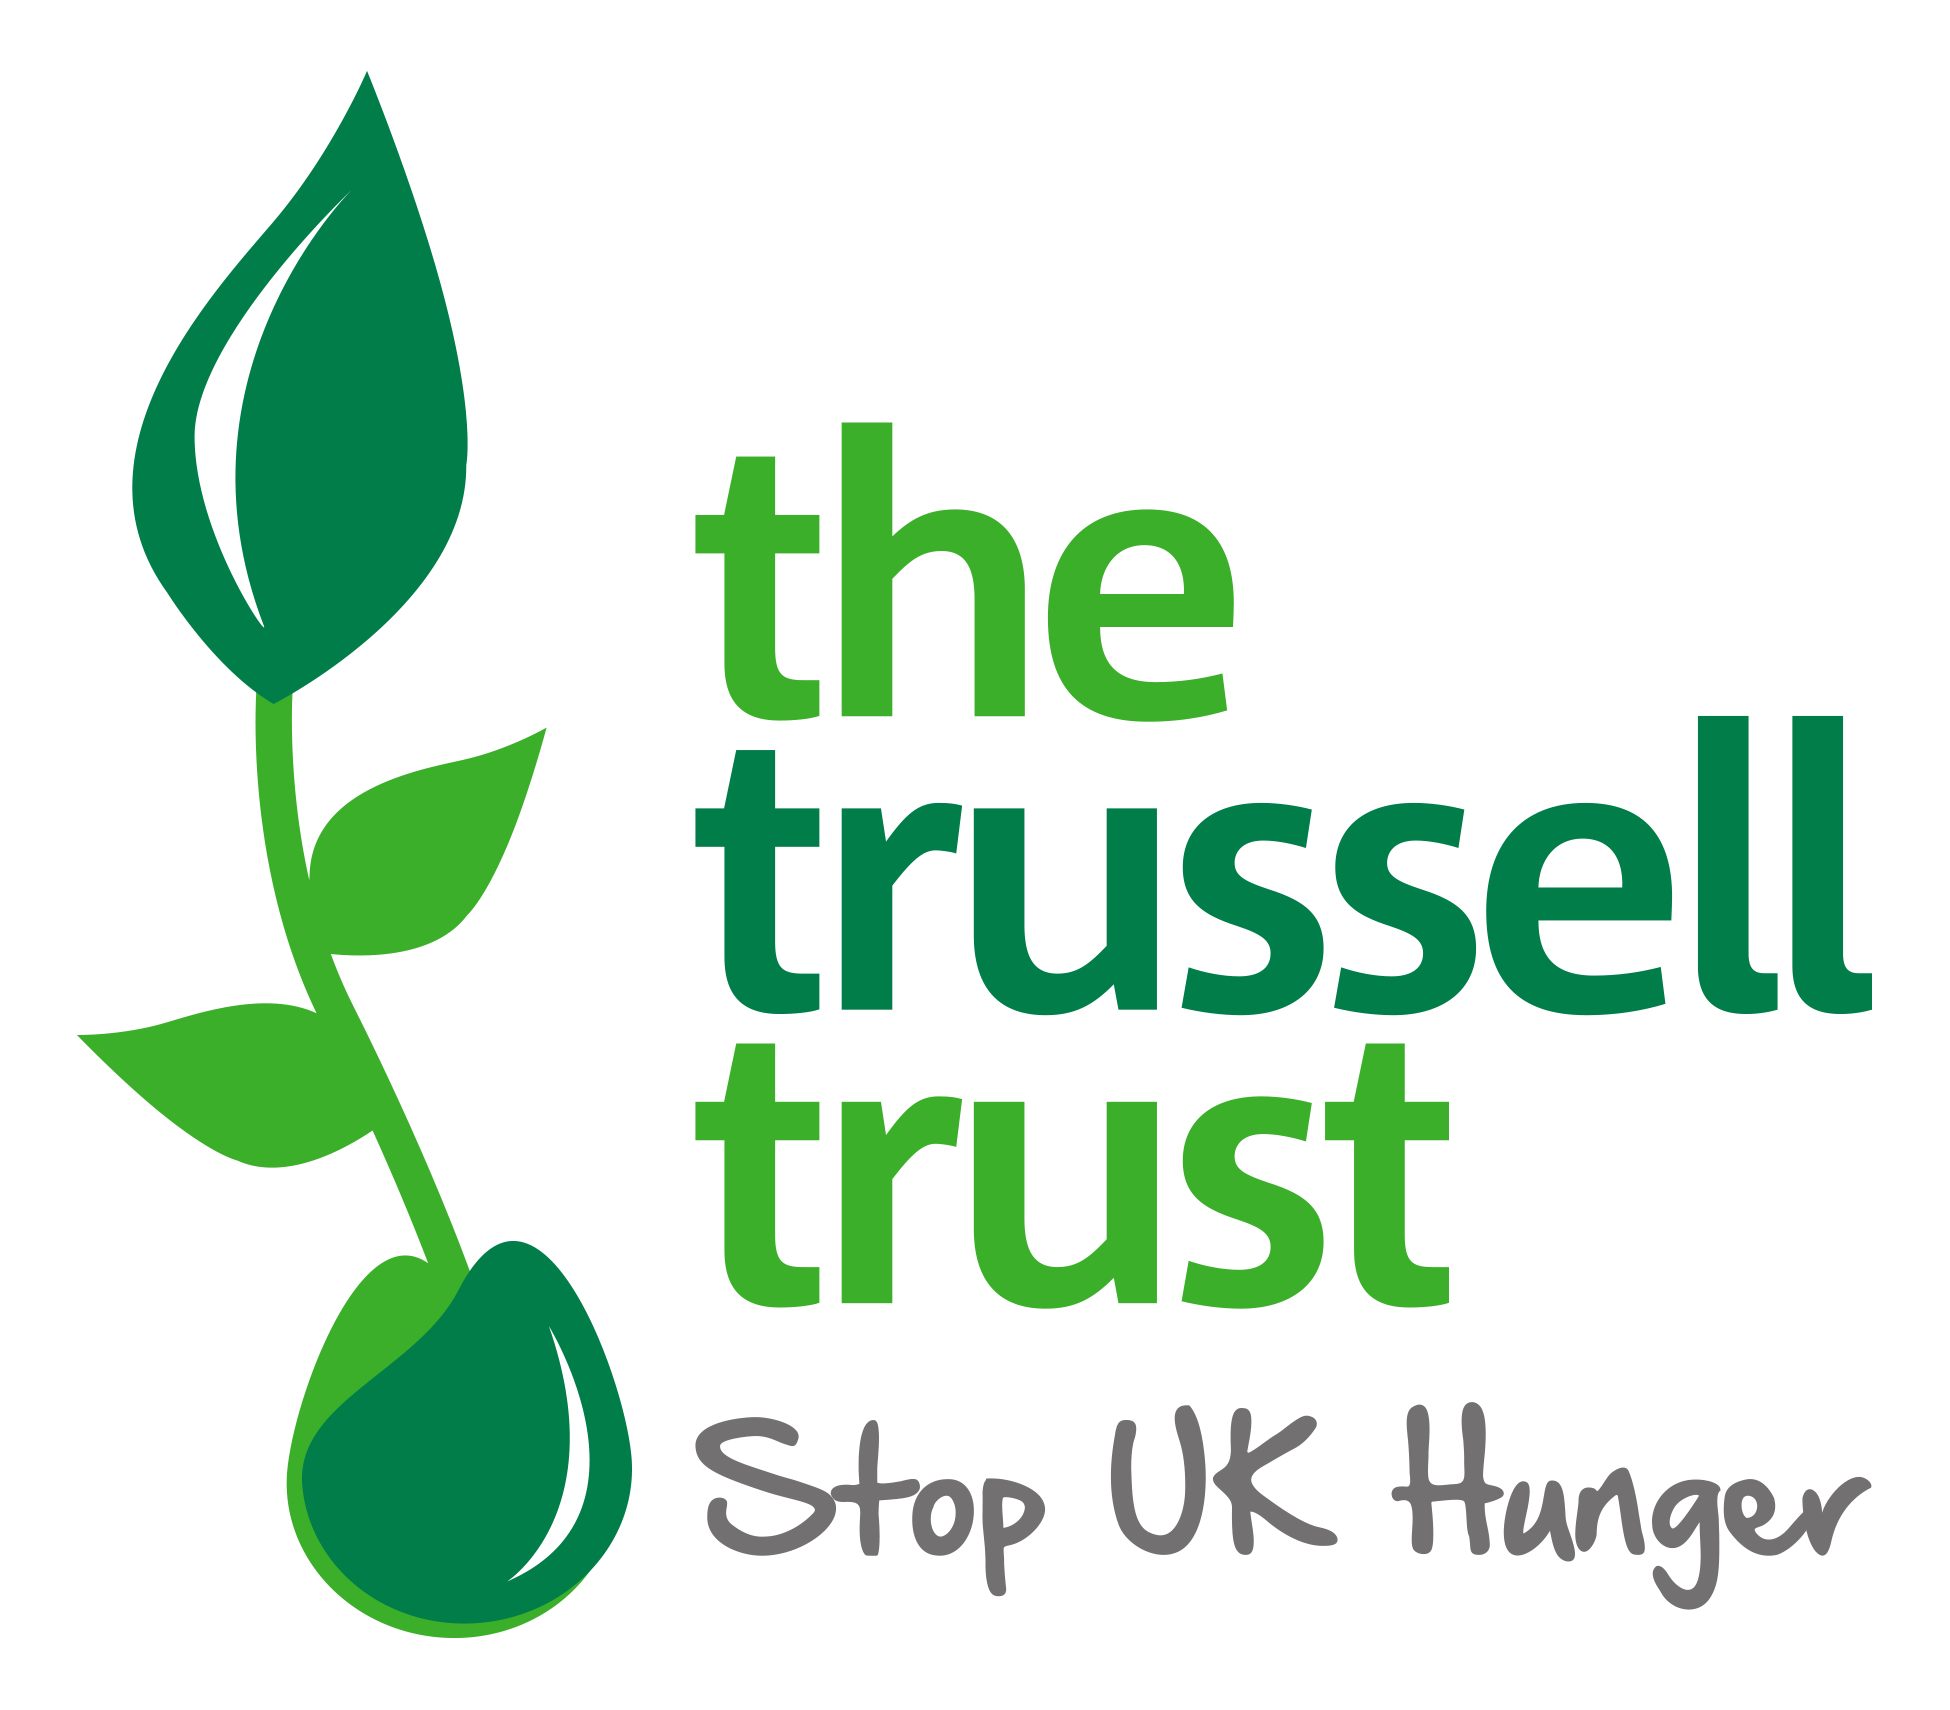 The Trussell Trust 